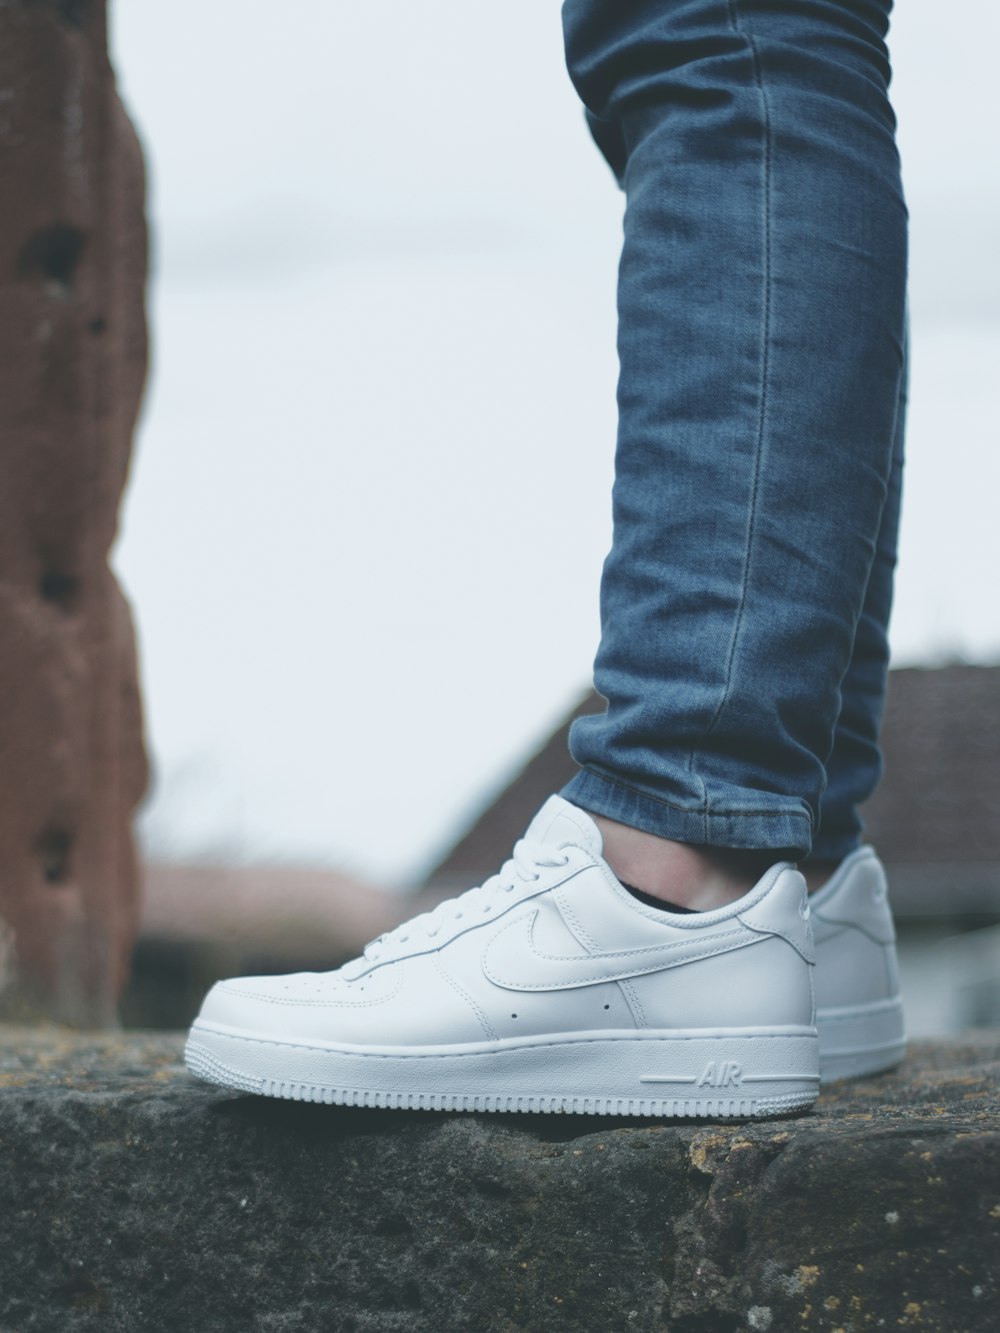 person in blue denim jeans wearing white nike sneakers photo – Free Image  on Unsplash